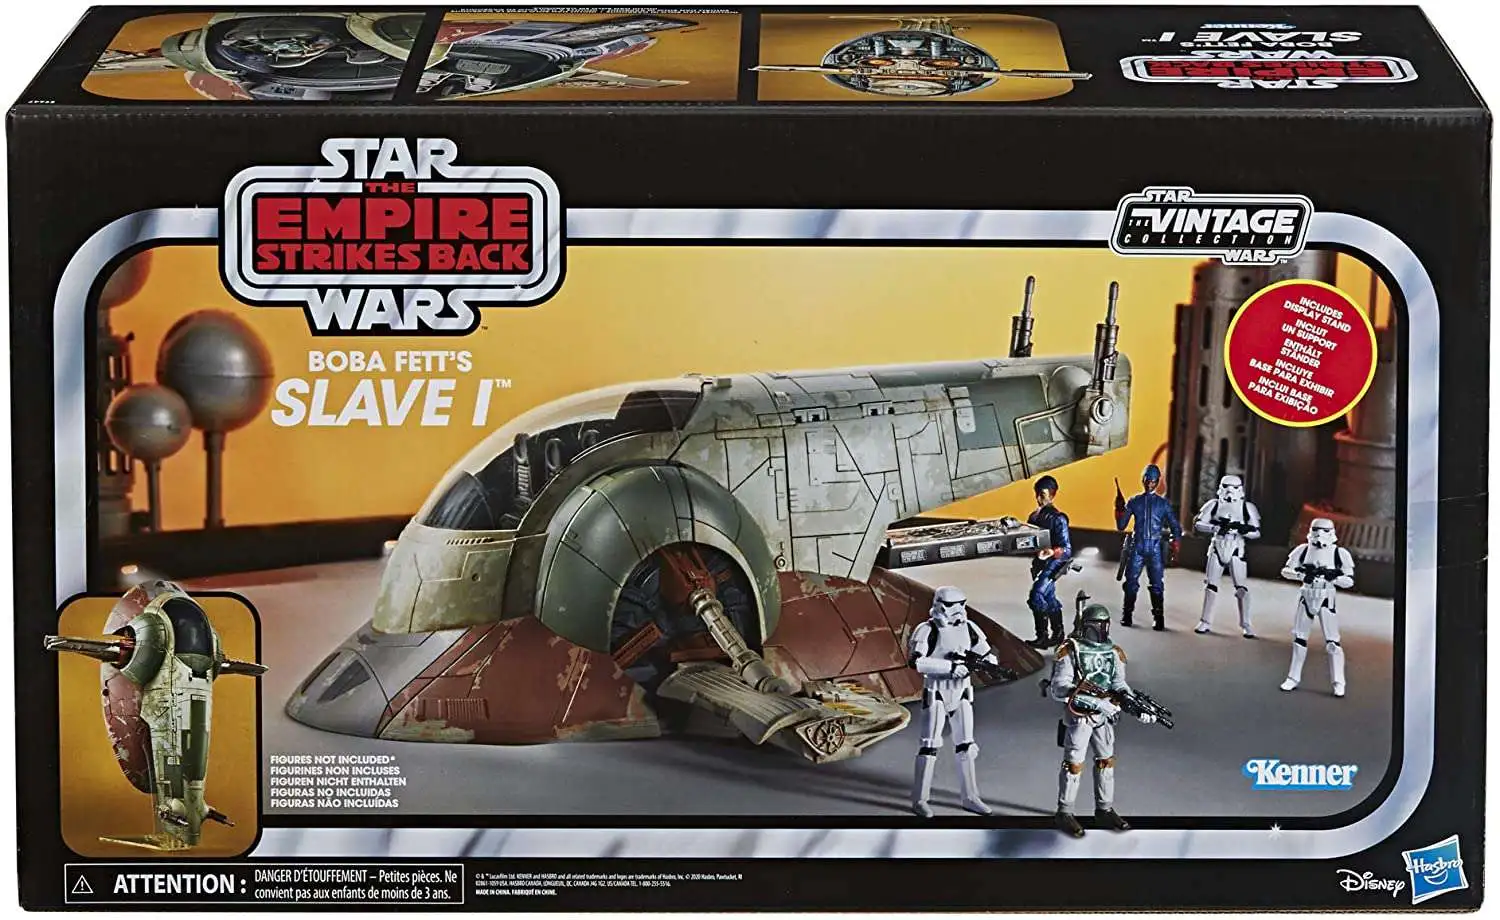 Star Wars NEW Boba Fett's Slave I Vintage Collection 3.75 Scale Exclusive 